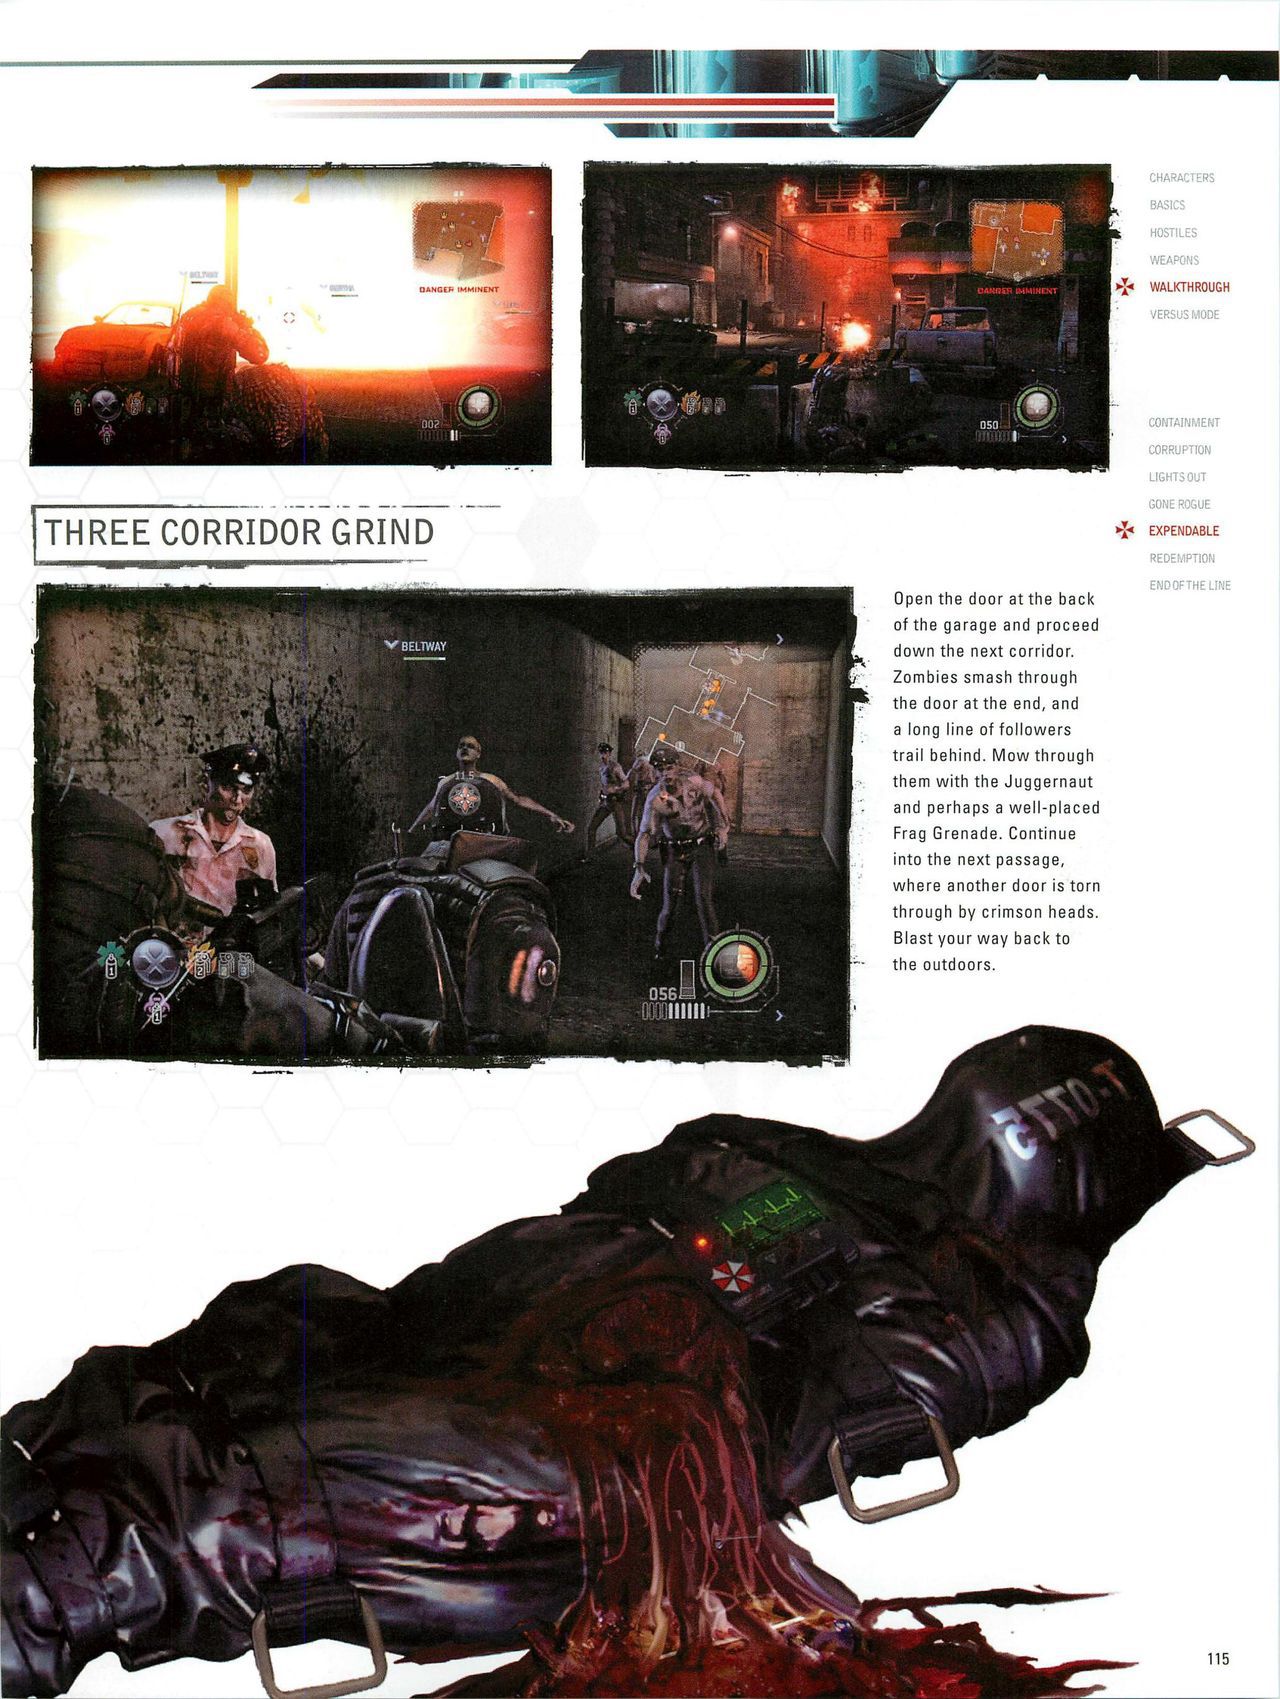 Resident Evil: Operation Raccoon City Official Strategy Guide (watermarked) 117